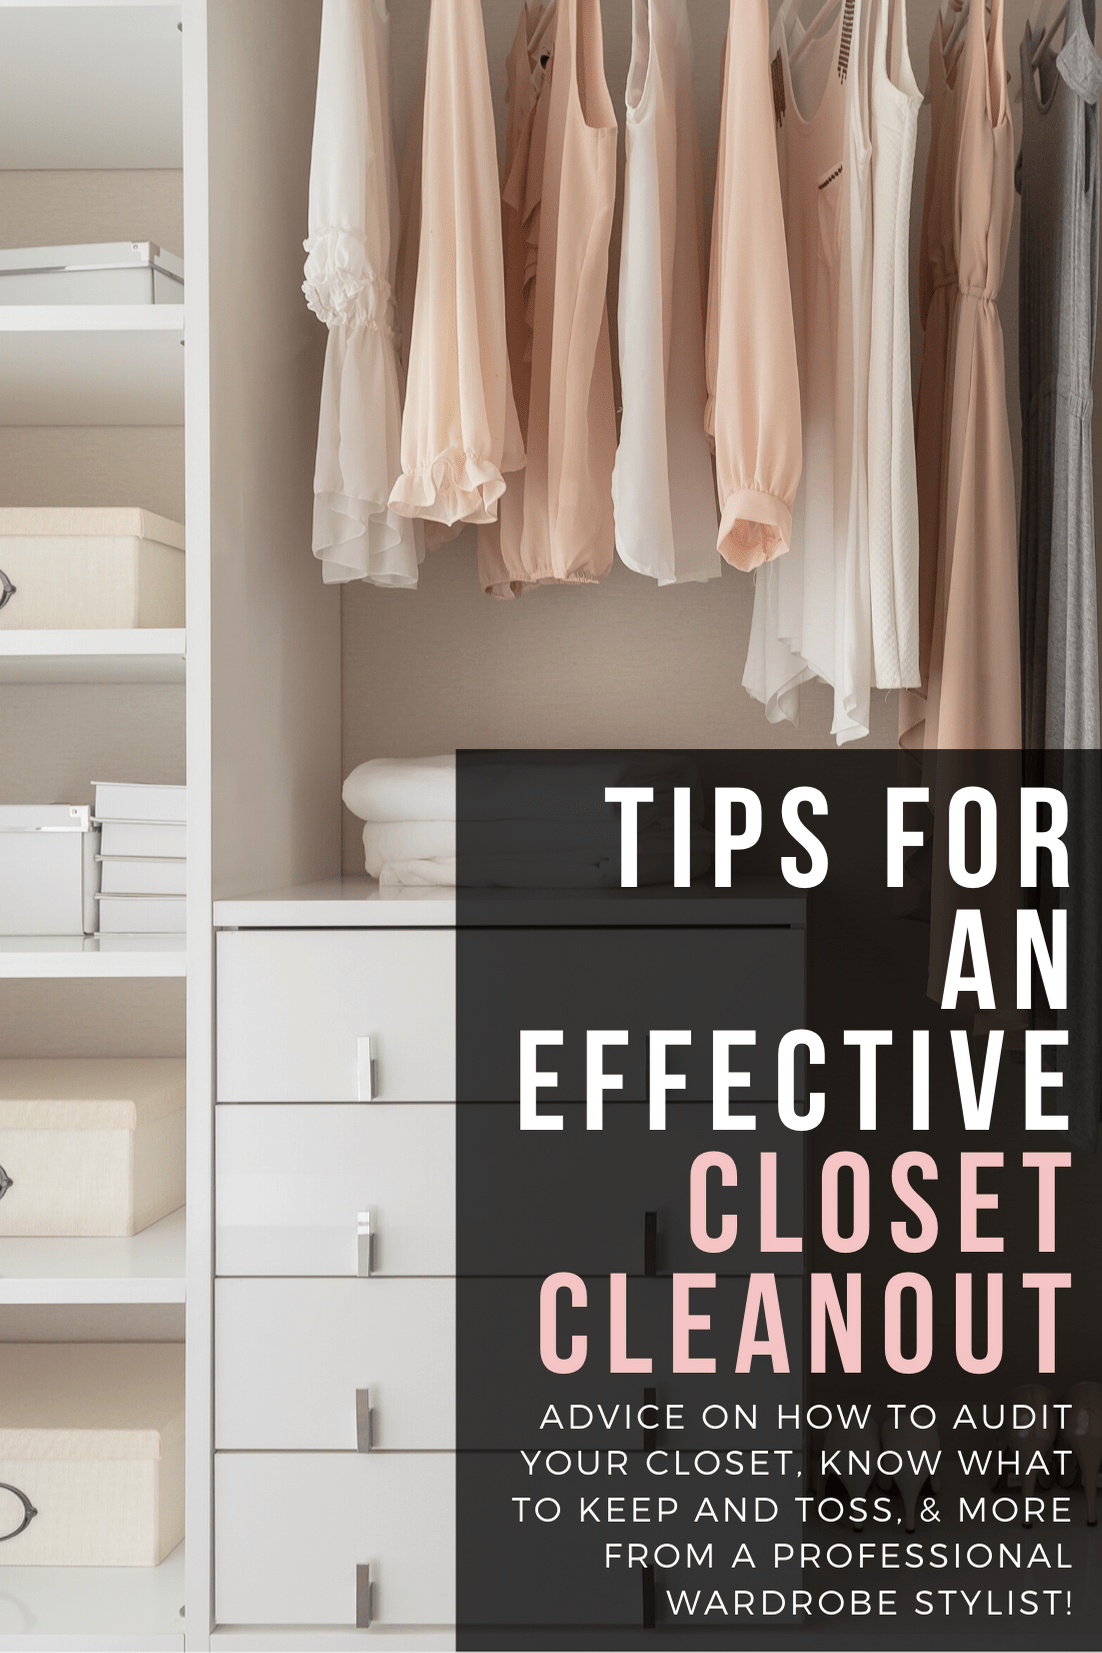 Performing A Closet Cleanout: Tips from a Pro